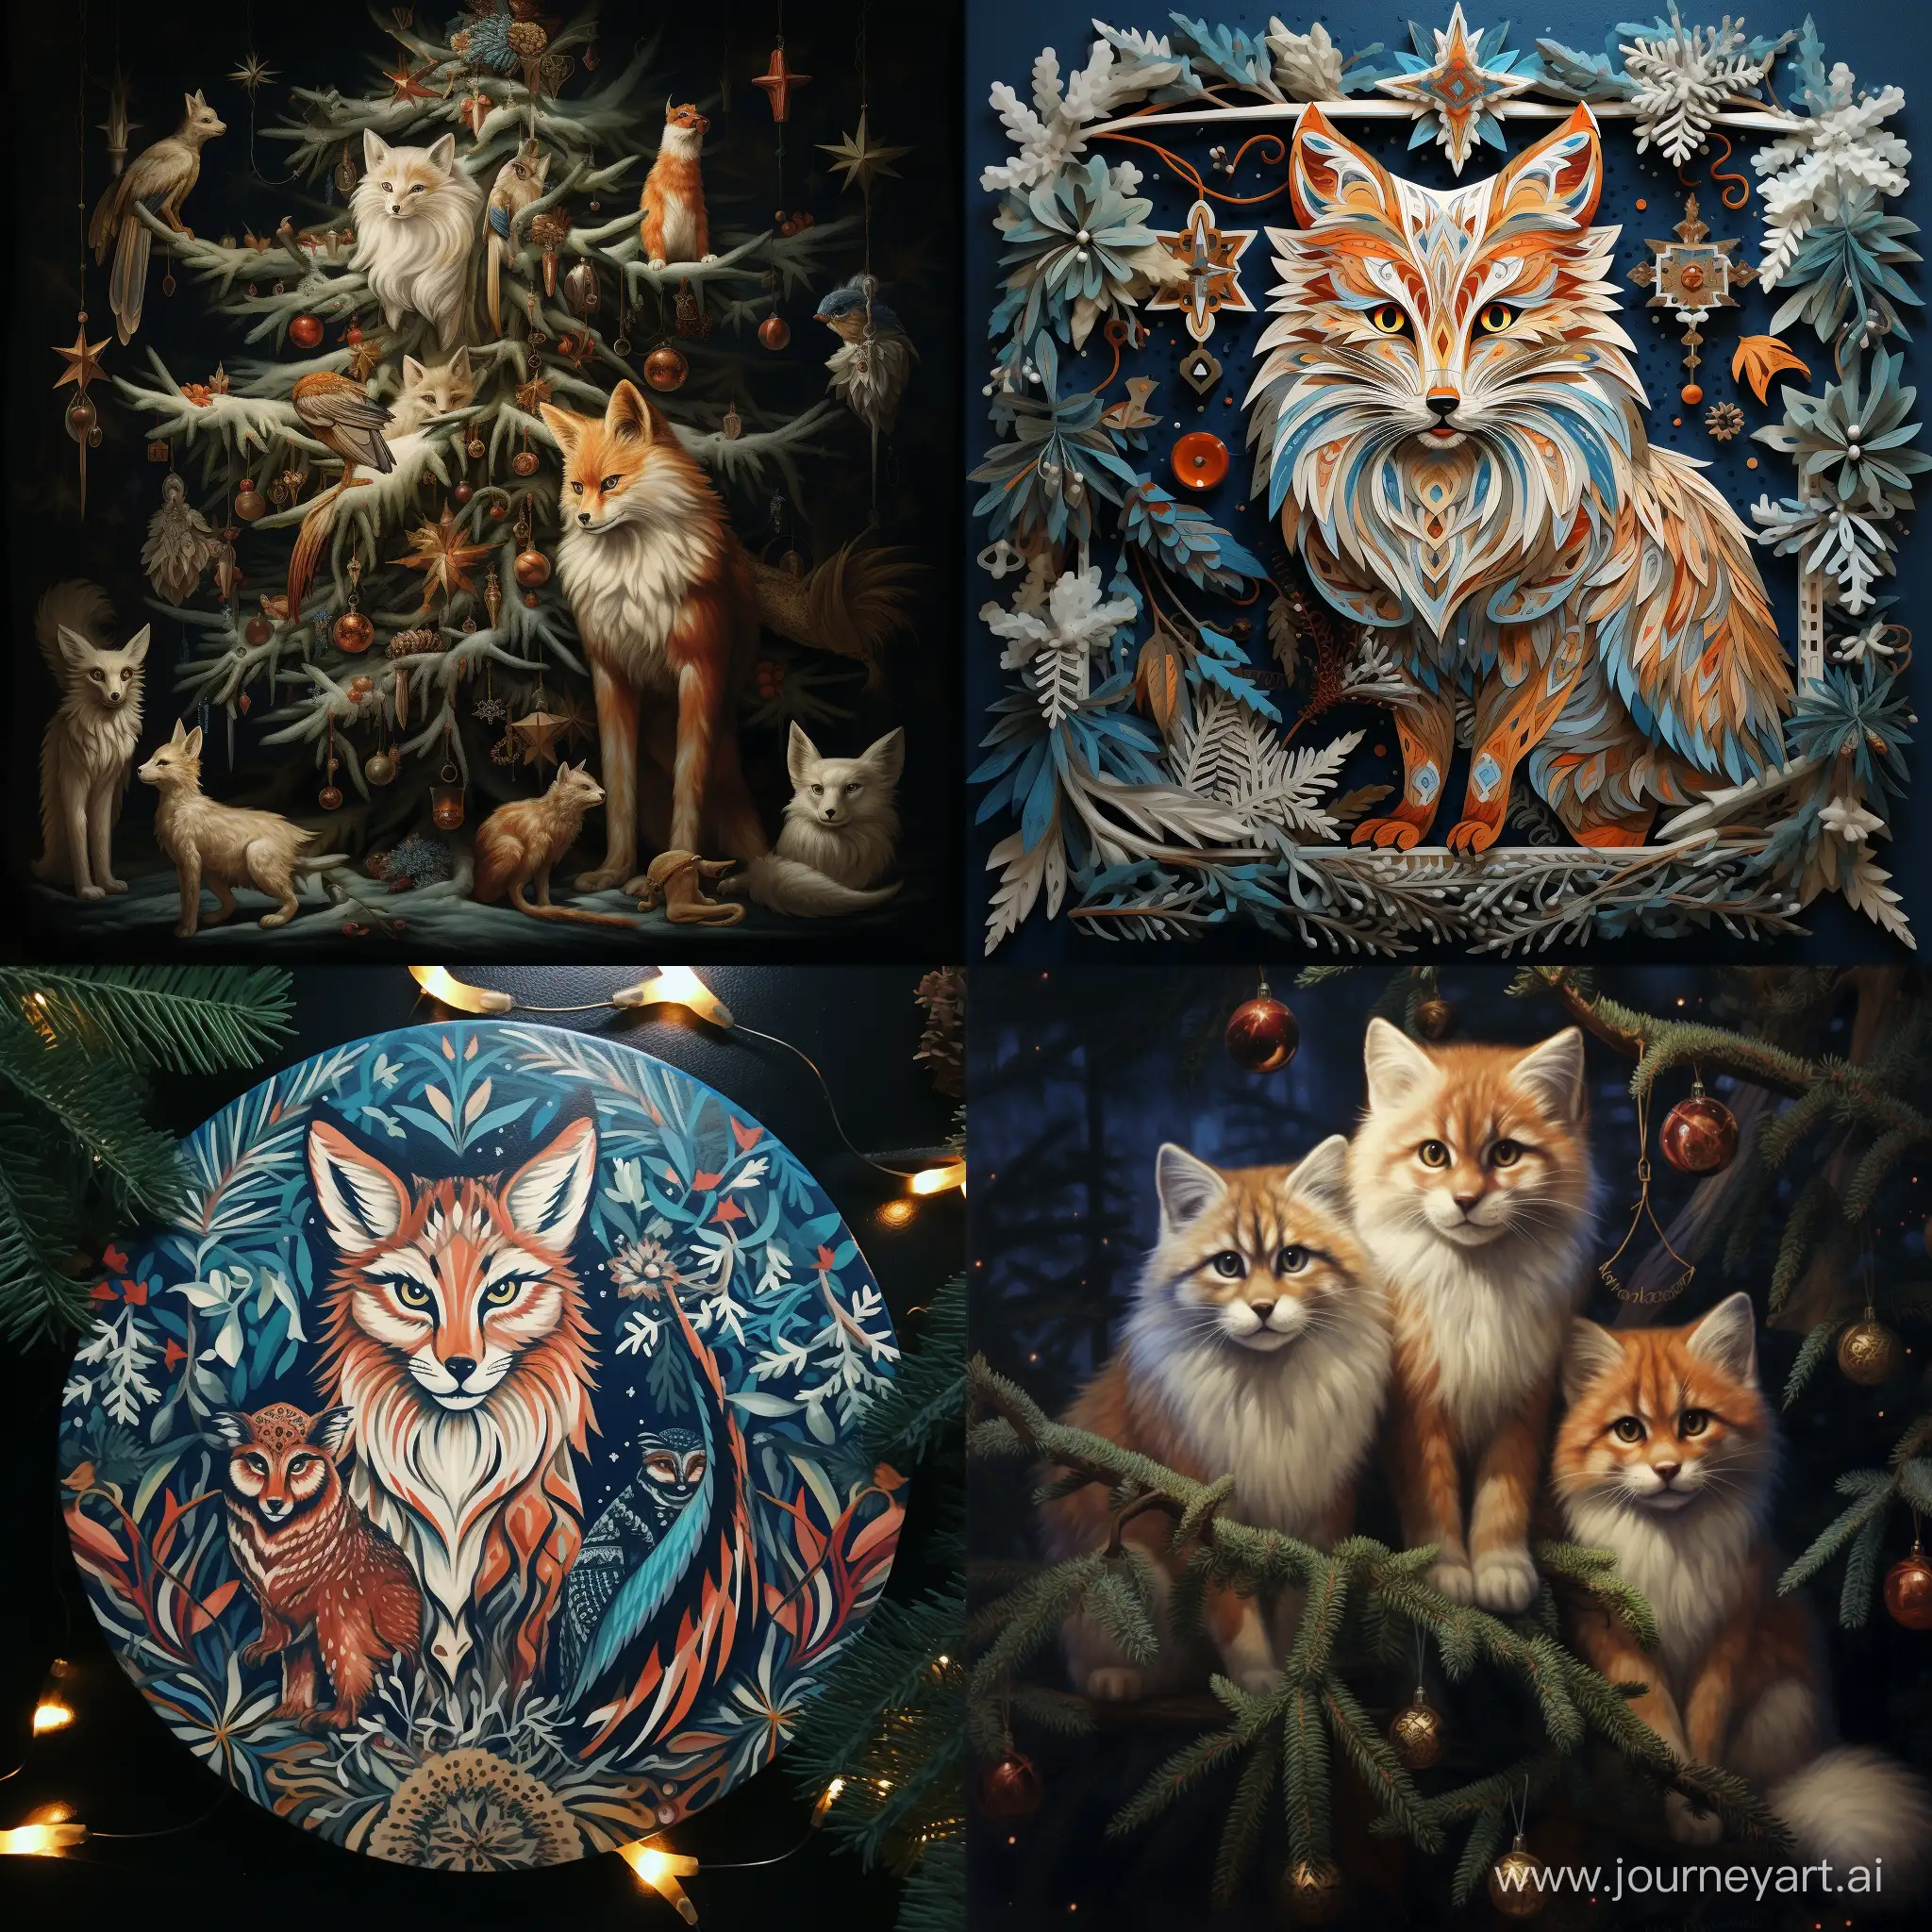 Whimsical-Wildlife-Celebration-Lynx-Fox-and-Owl-Ring-in-the-New-Year-with-Art-and-Christmas-Cheer